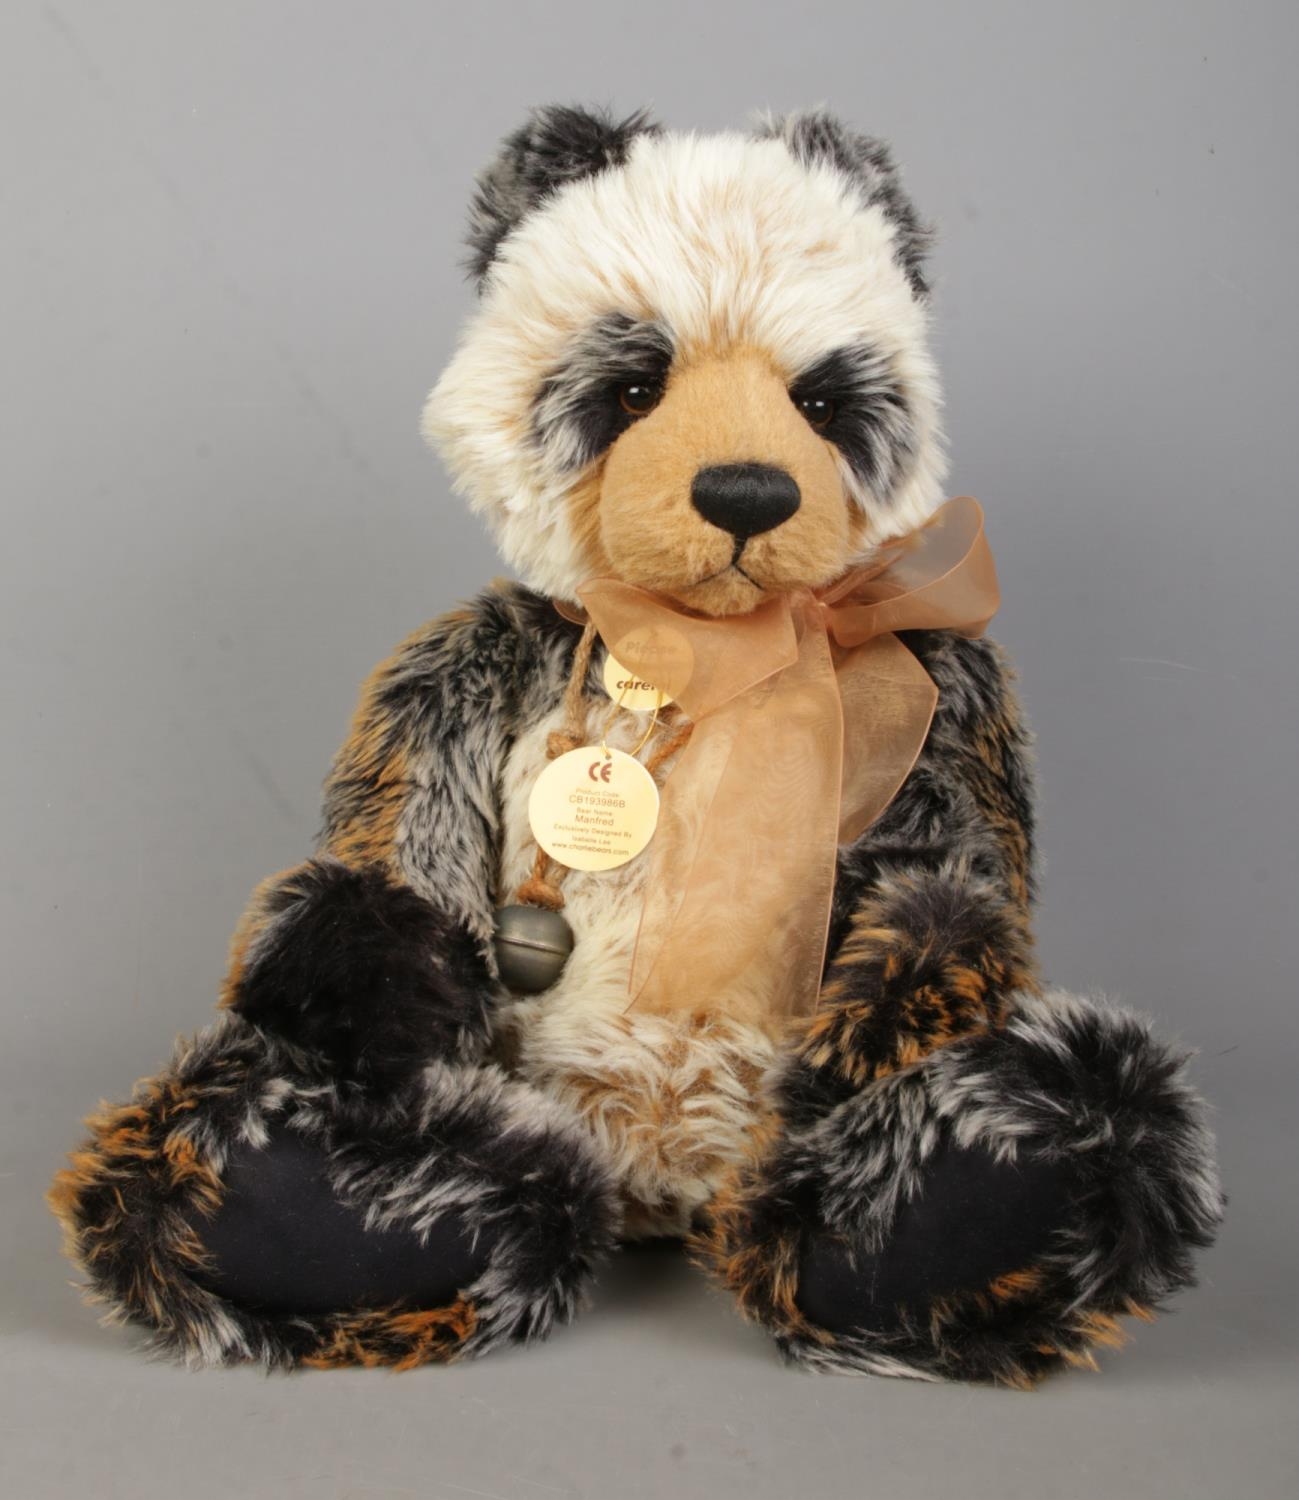 A Charlie Bears jointed teddy bear, Manfred the Panda. Exclusively designed by Isabella Lee. With